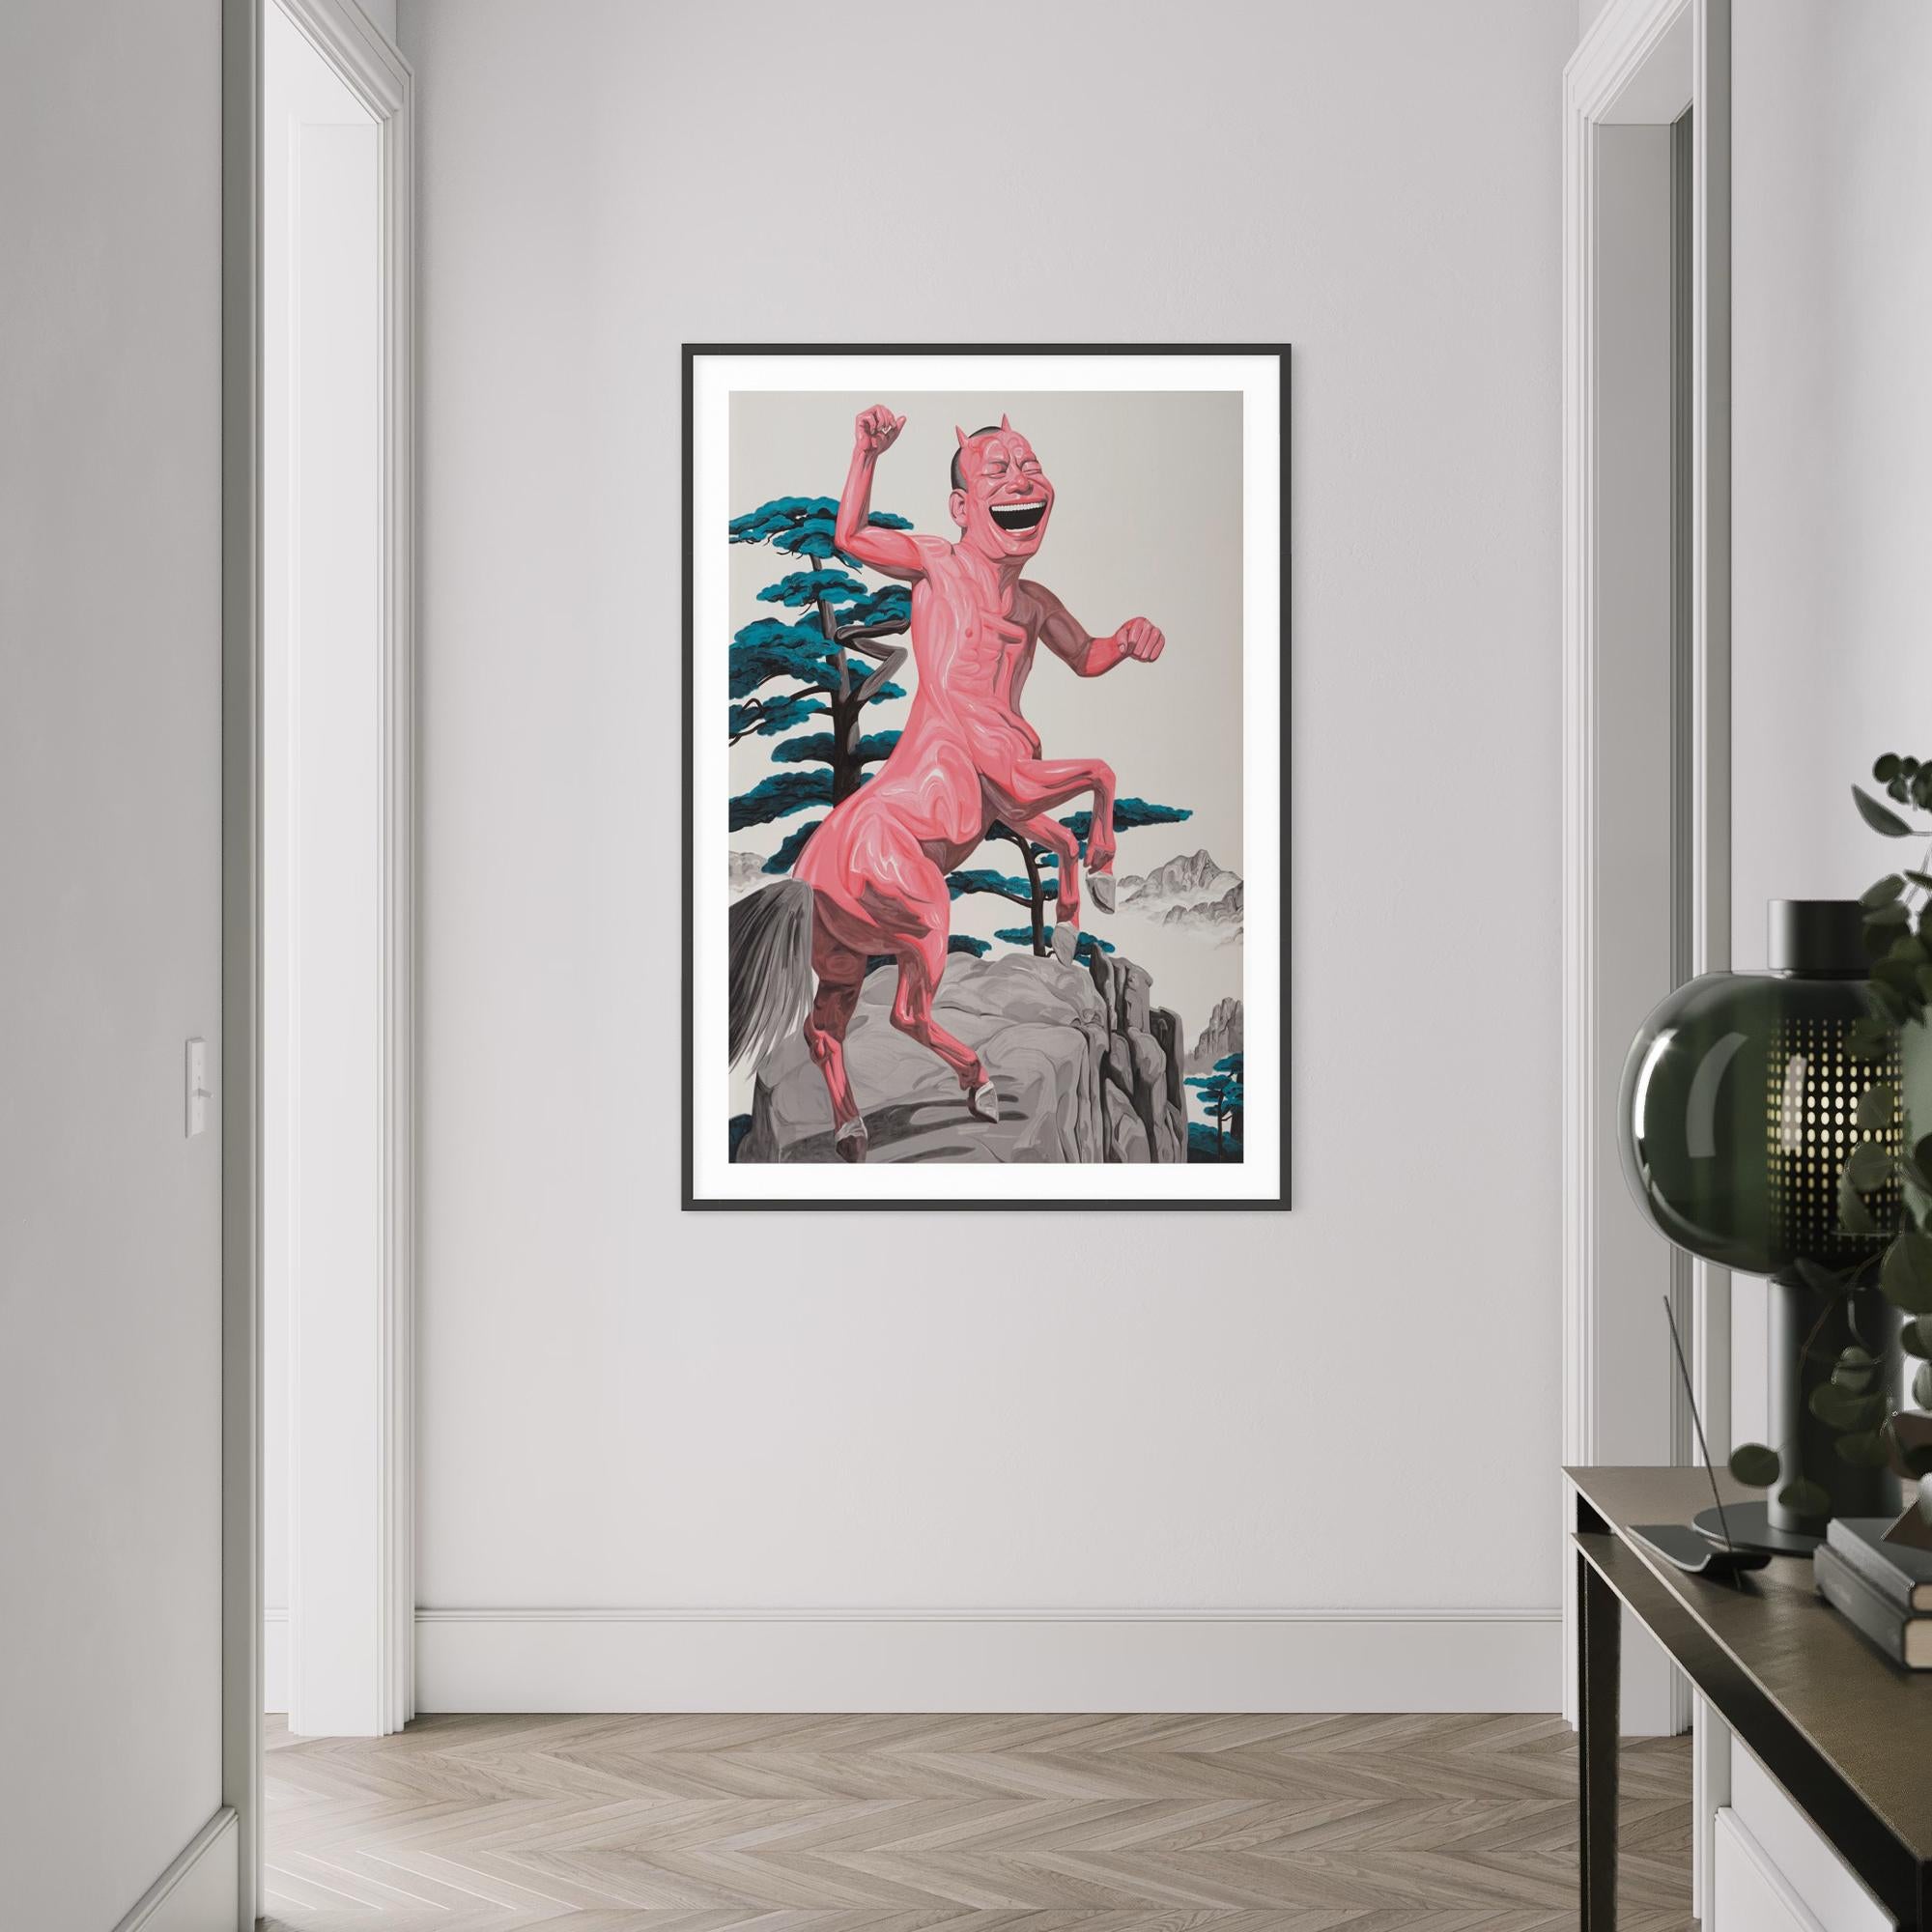 Yue Minjun Figurative Print - Pine Tree - Contemporary, 21st Century, Lithograph, Limited Edition, Chinese